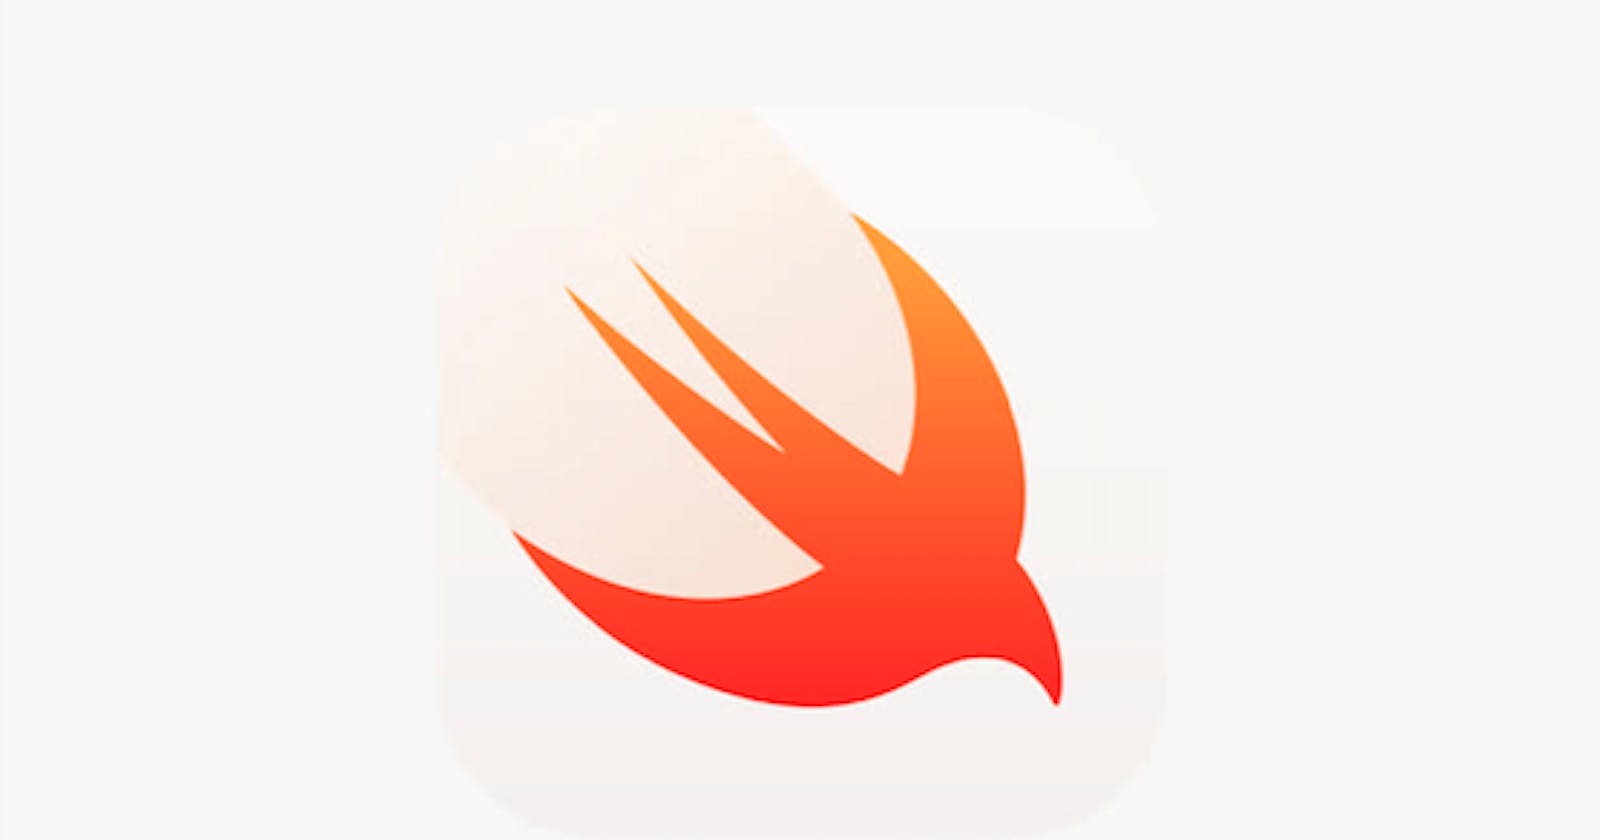 What’s New in Swift 5.6 and 5.7